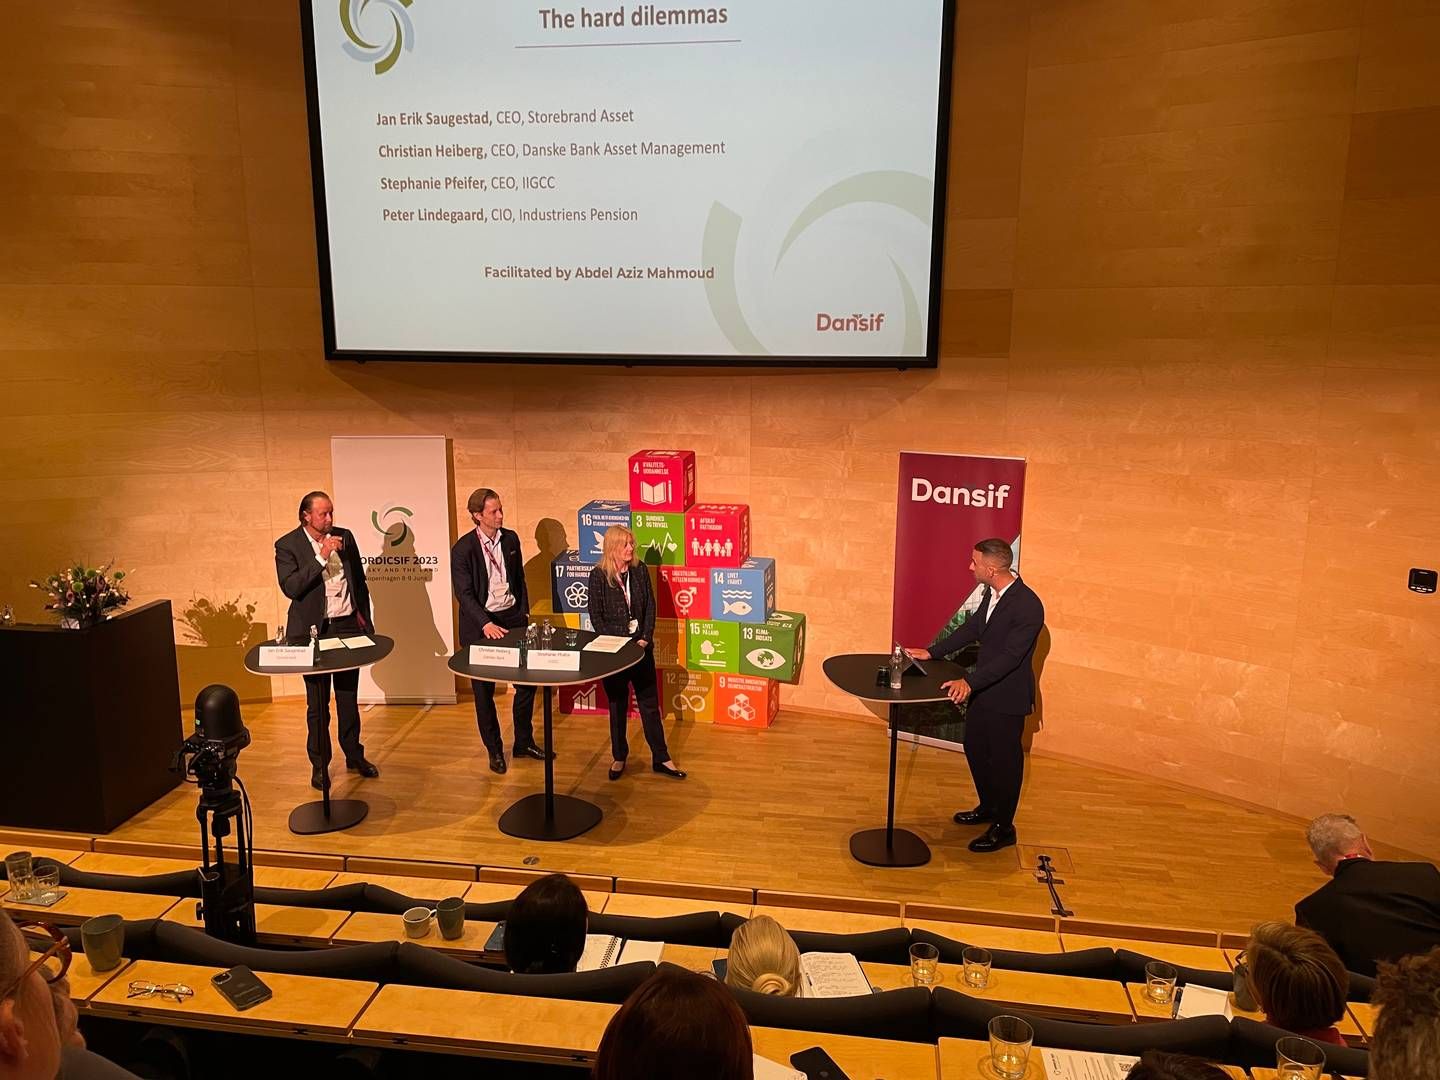 Three CEOs discussing the hard dilemmas of ESG-investing at the Nordicsif conference. From left: CEO at Storebrand AM Jan Erik Saugestad, CEO at Danske Bank AM Christian Heiberg, and CEO of IIGCC Stephanie Pfeifer. | Photo: Philip Madsen